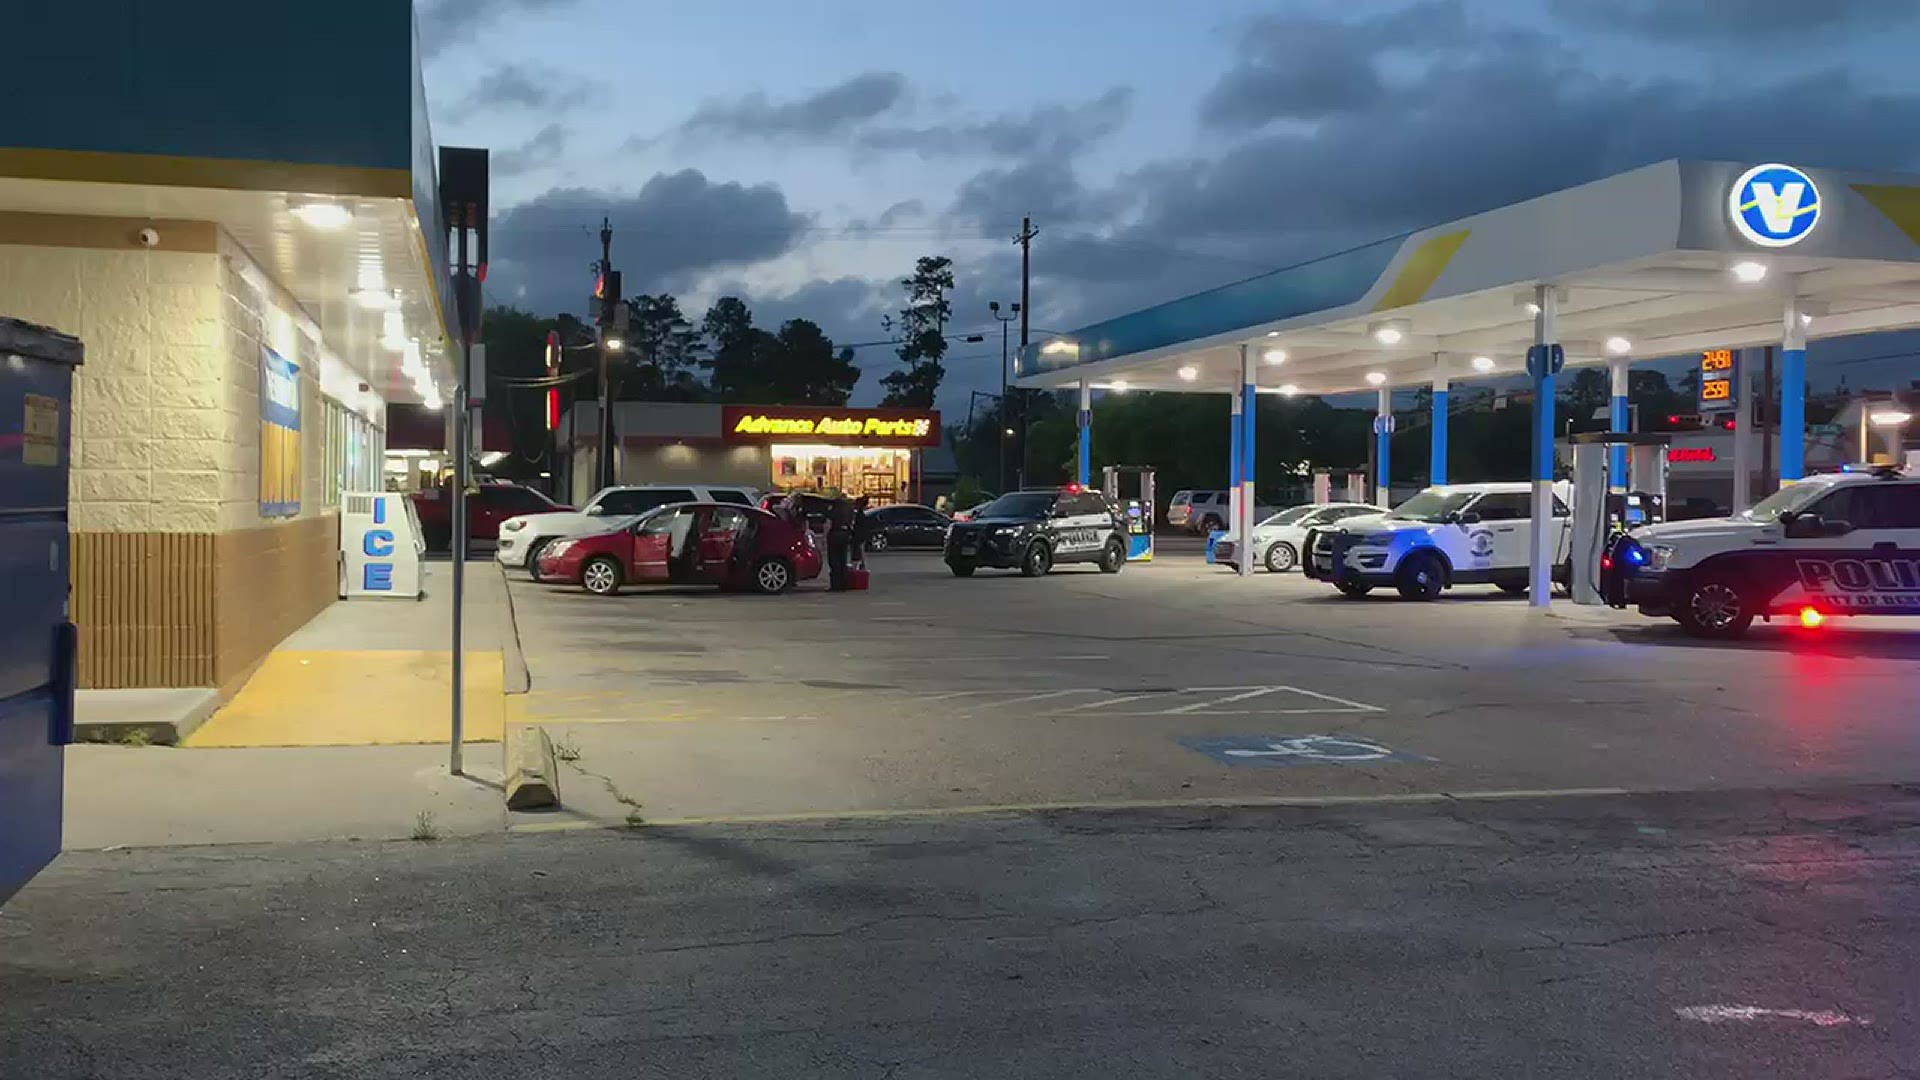 It happened Tuesday night at a Valero in Beaumont's North End.